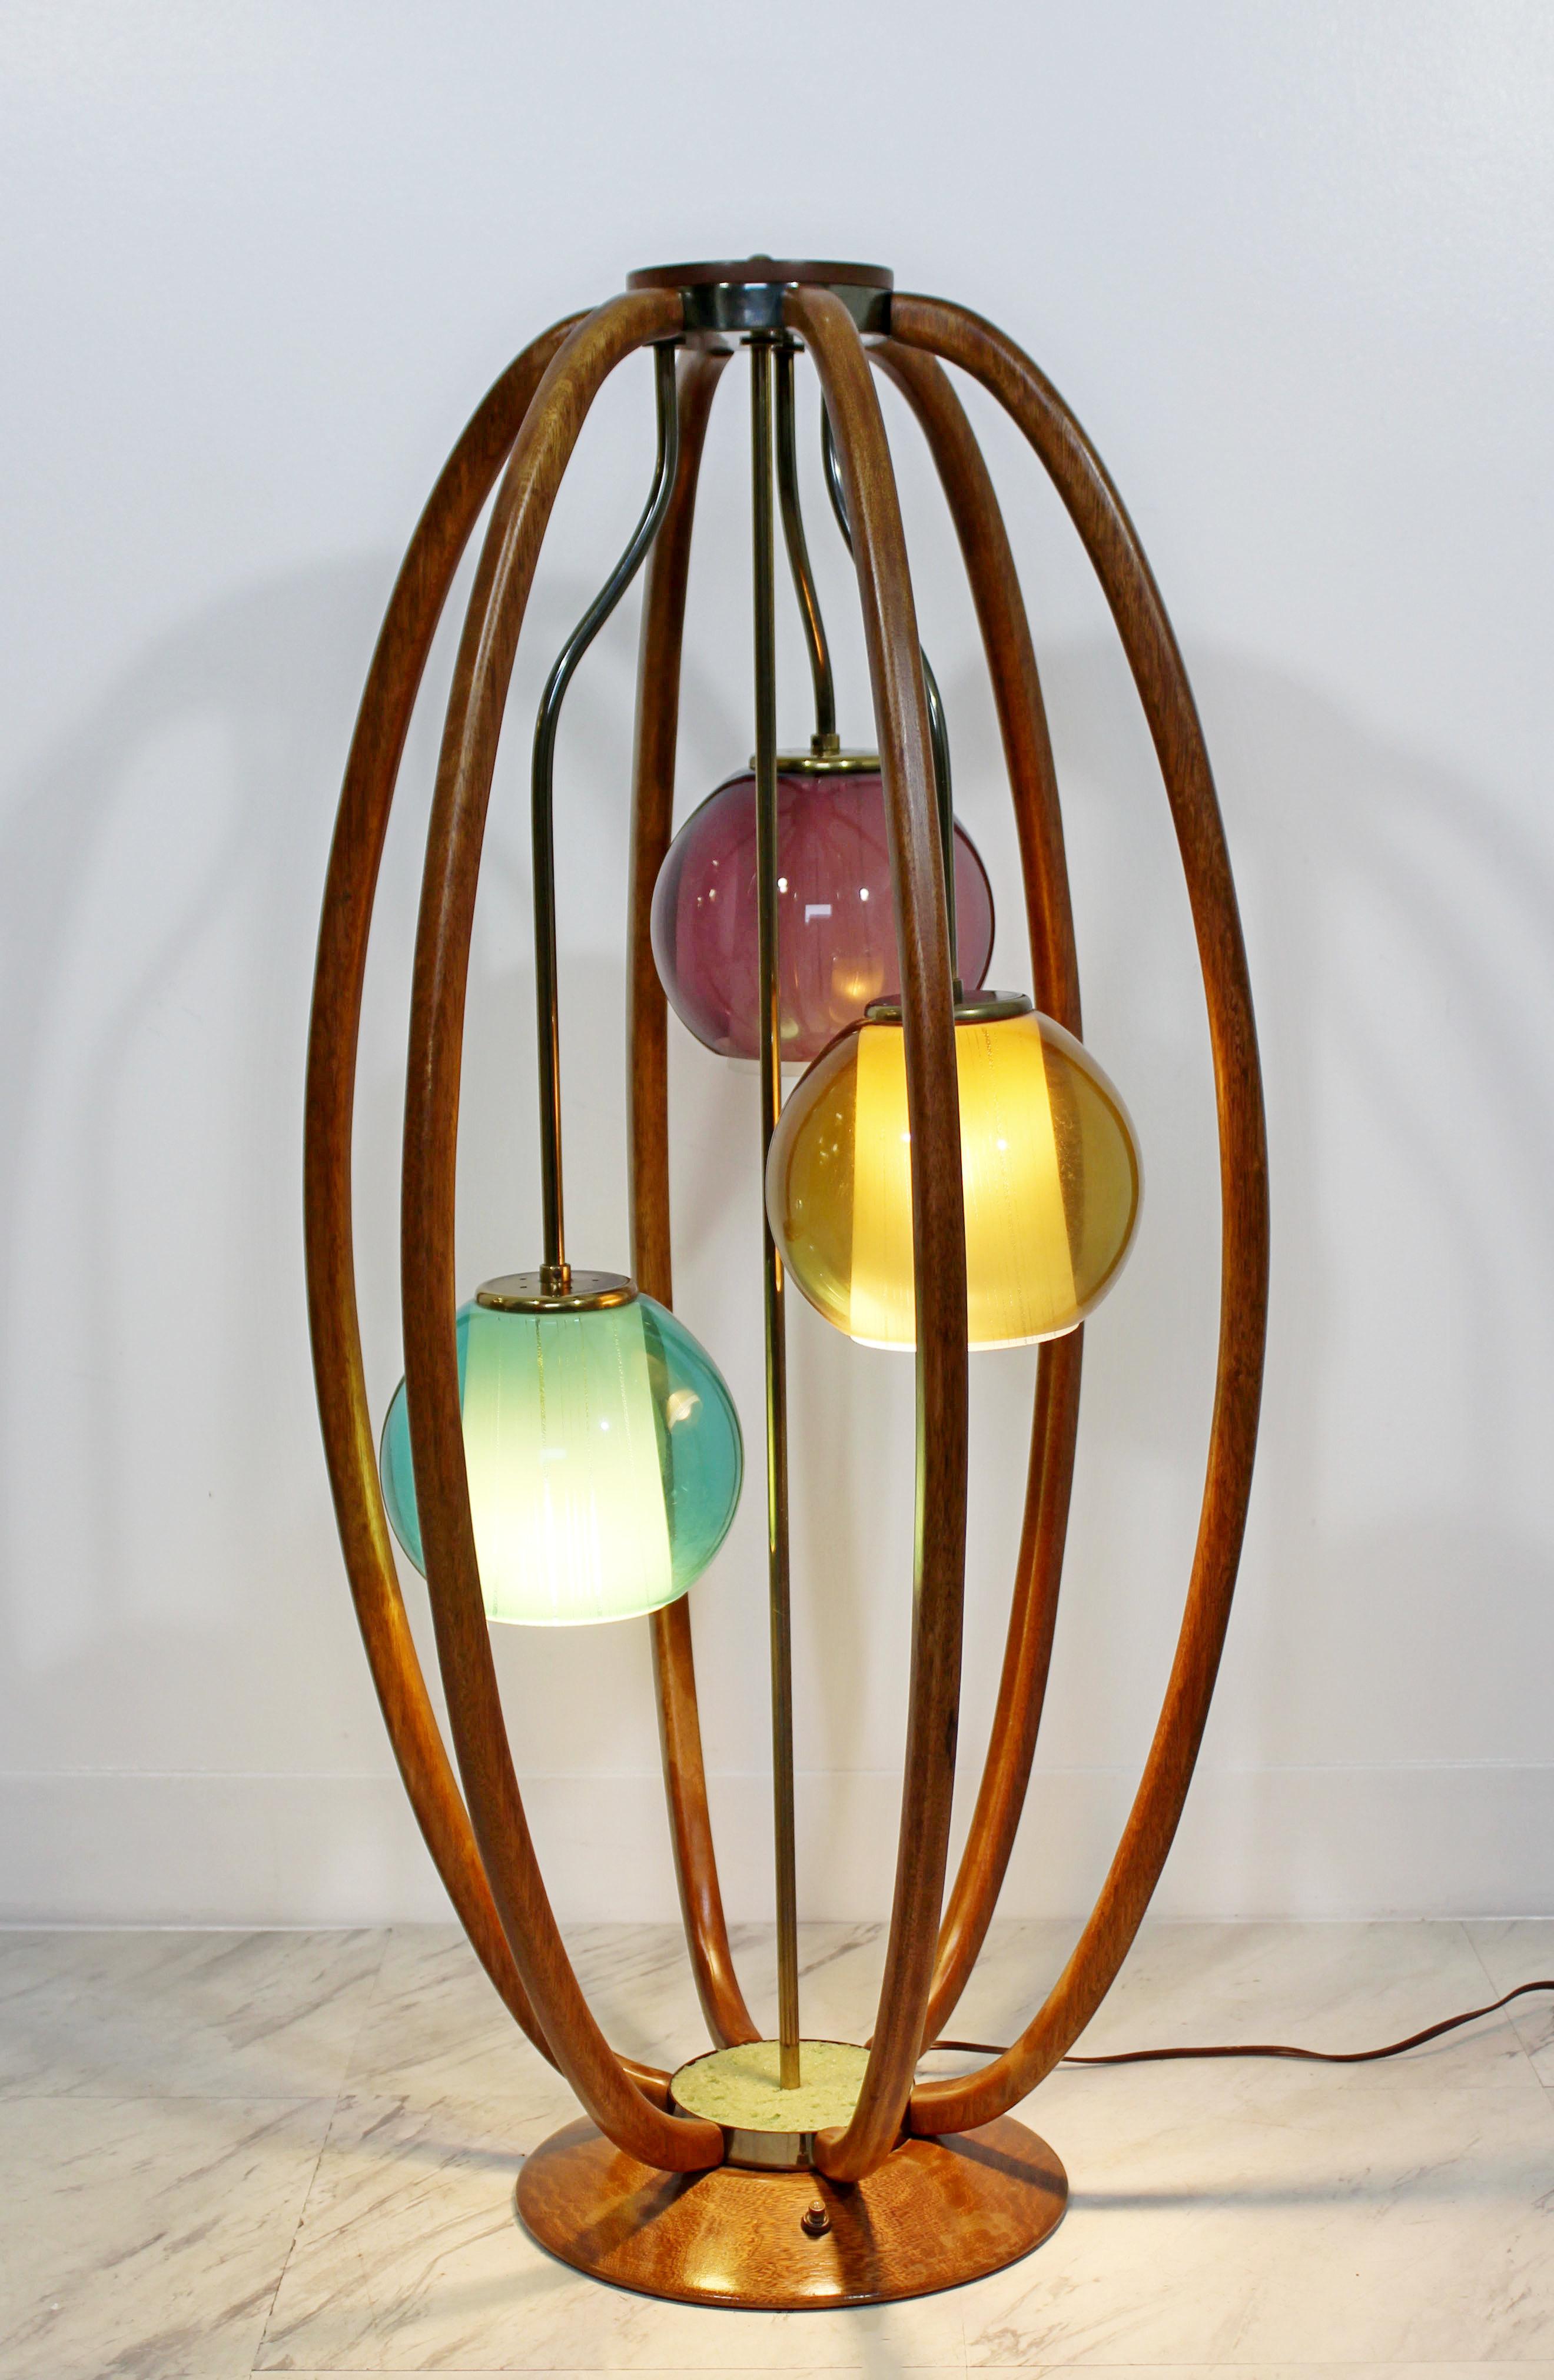 American Mid-Century Modern Modeline Caged Wood Table Lamp with Colored Glass 3 Heads